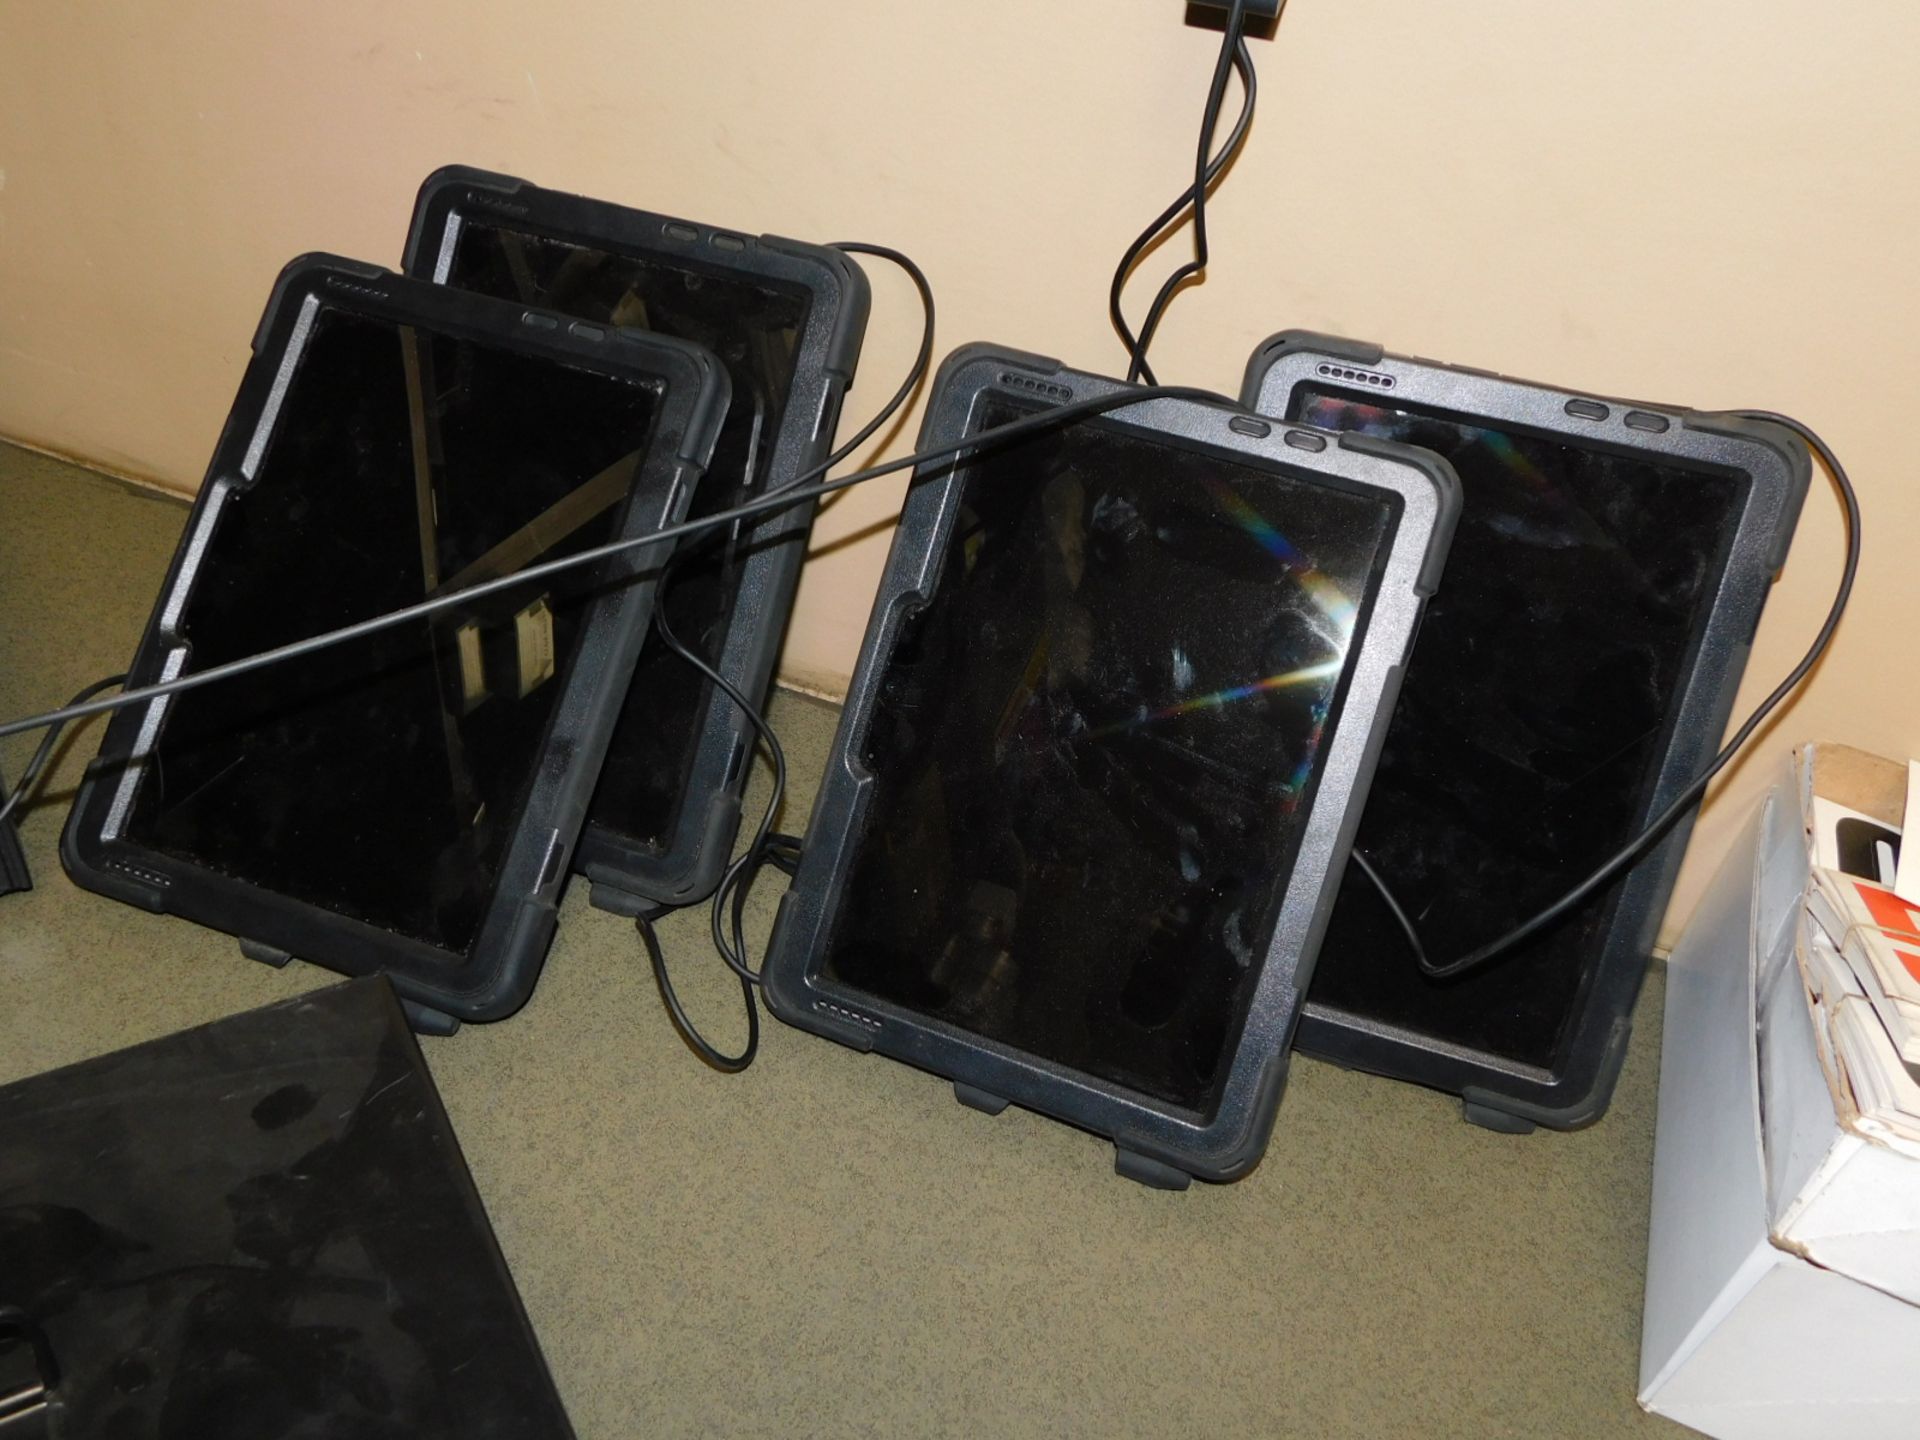 (4) MICROSOFT TABLETS AT RECEIVING SCALES; WIFI CONNECTED TO PLATFORM SCALES, RUNS "SCRAP IT"